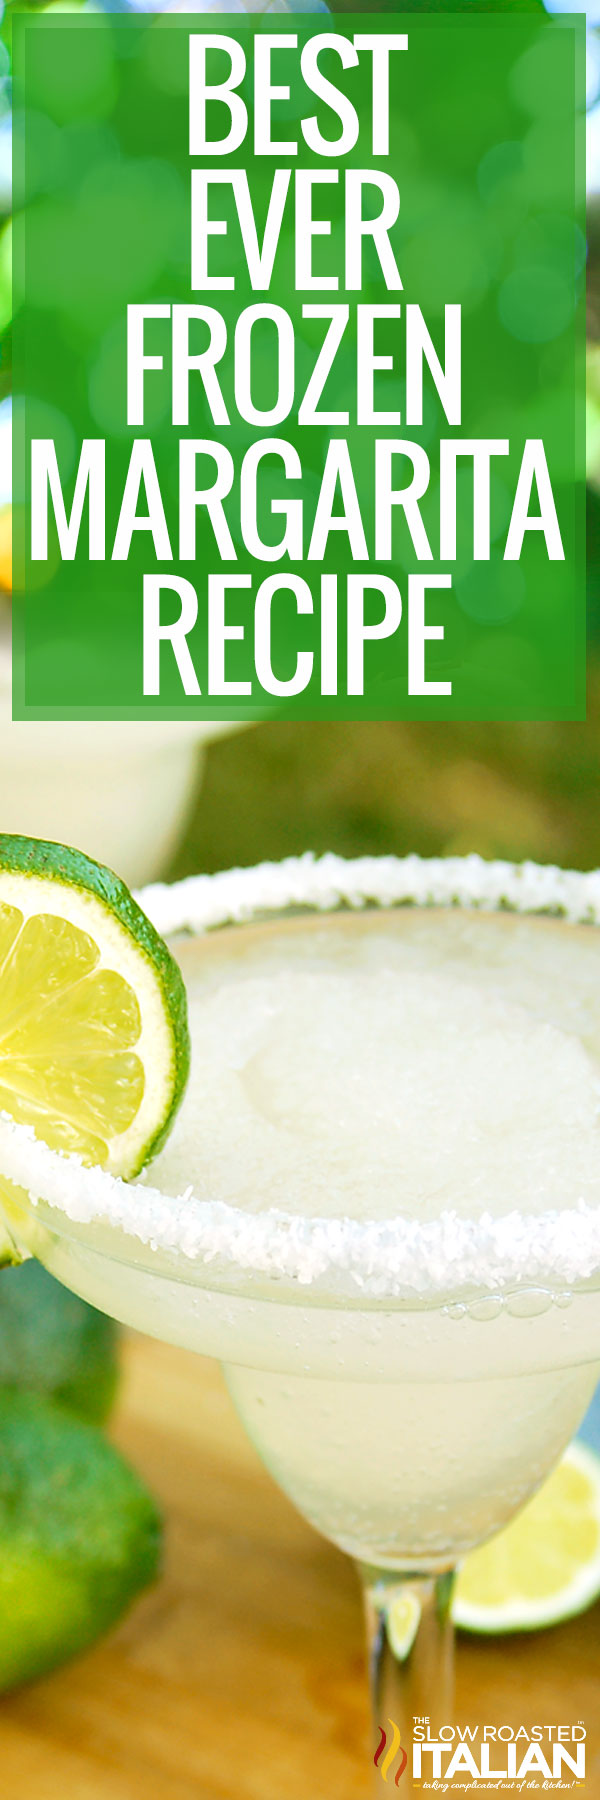 titled image (and shown): frozen margarita recipe